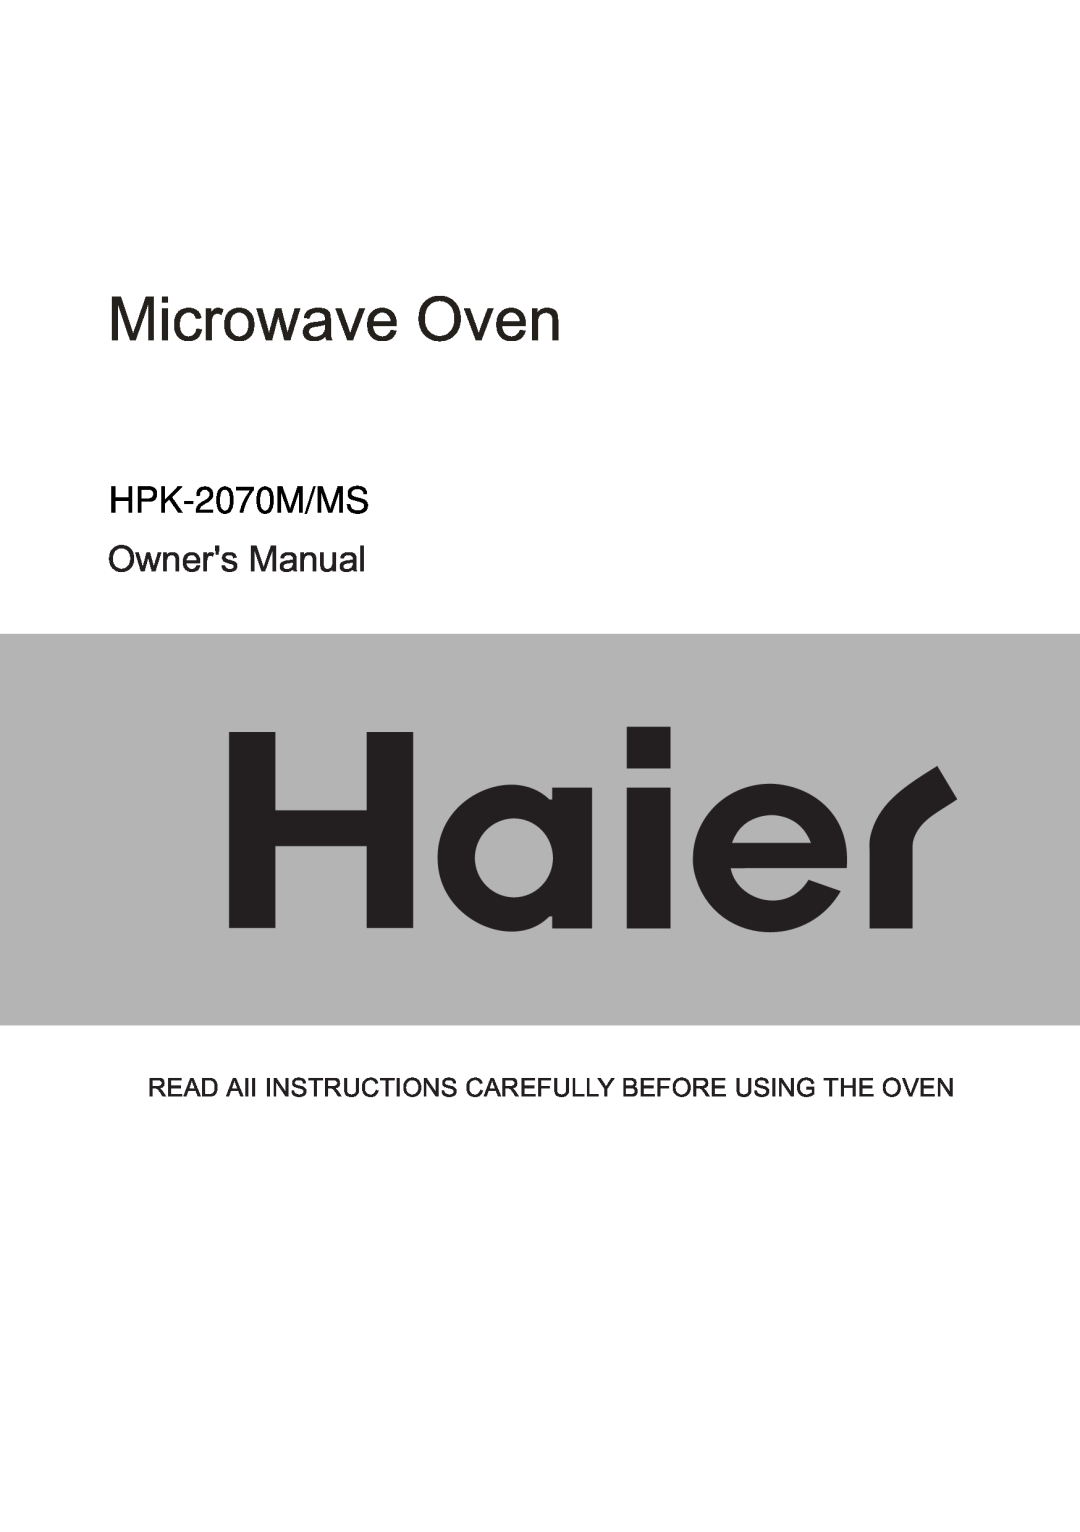 Haier HPK-2070MS owner manual Microwave Oven, HPK-2070M/MS 